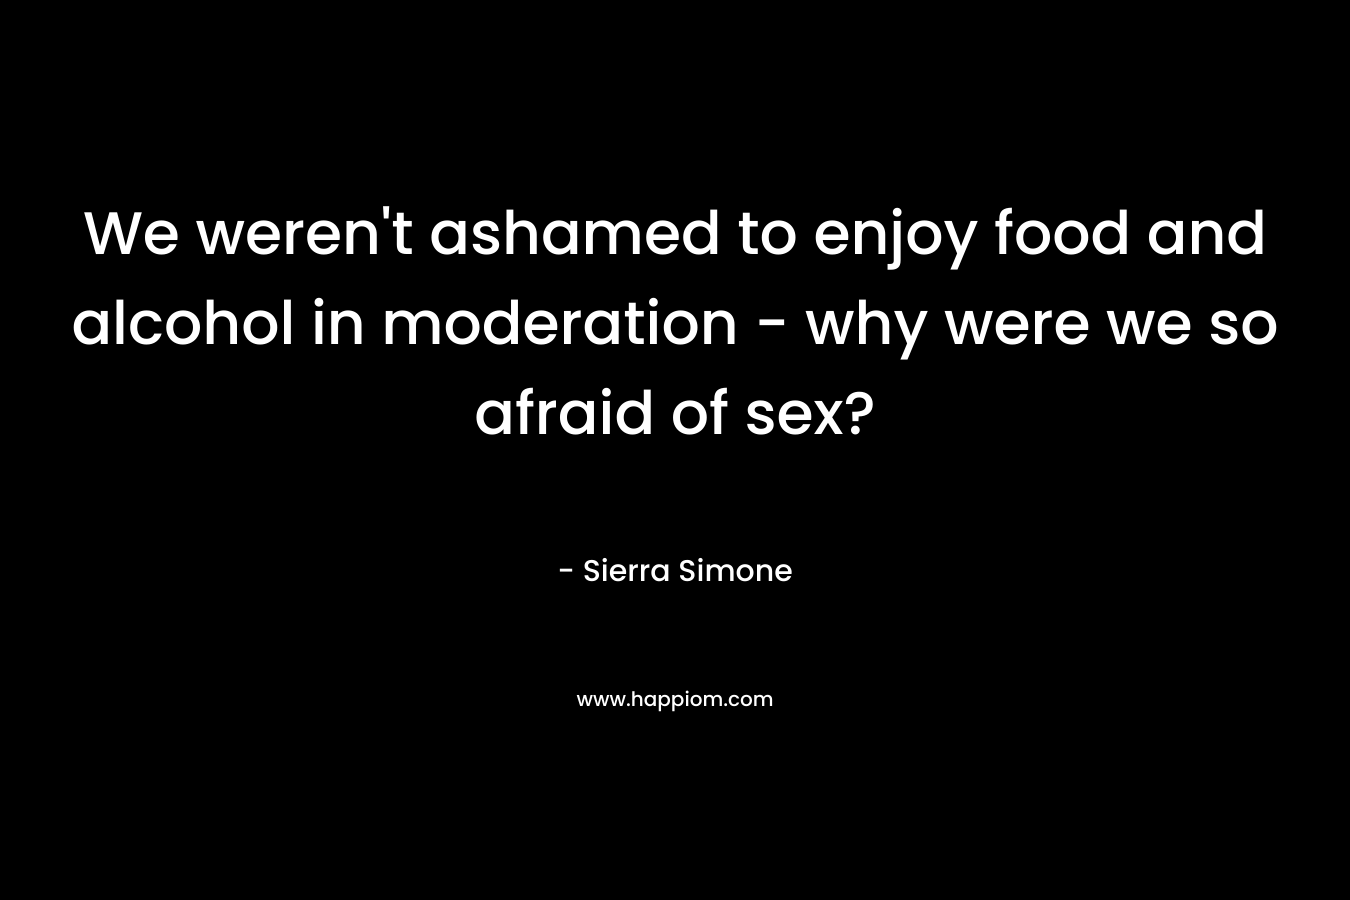 We weren't ashamed to enjoy food and alcohol in moderation - why were we so afraid of sex?